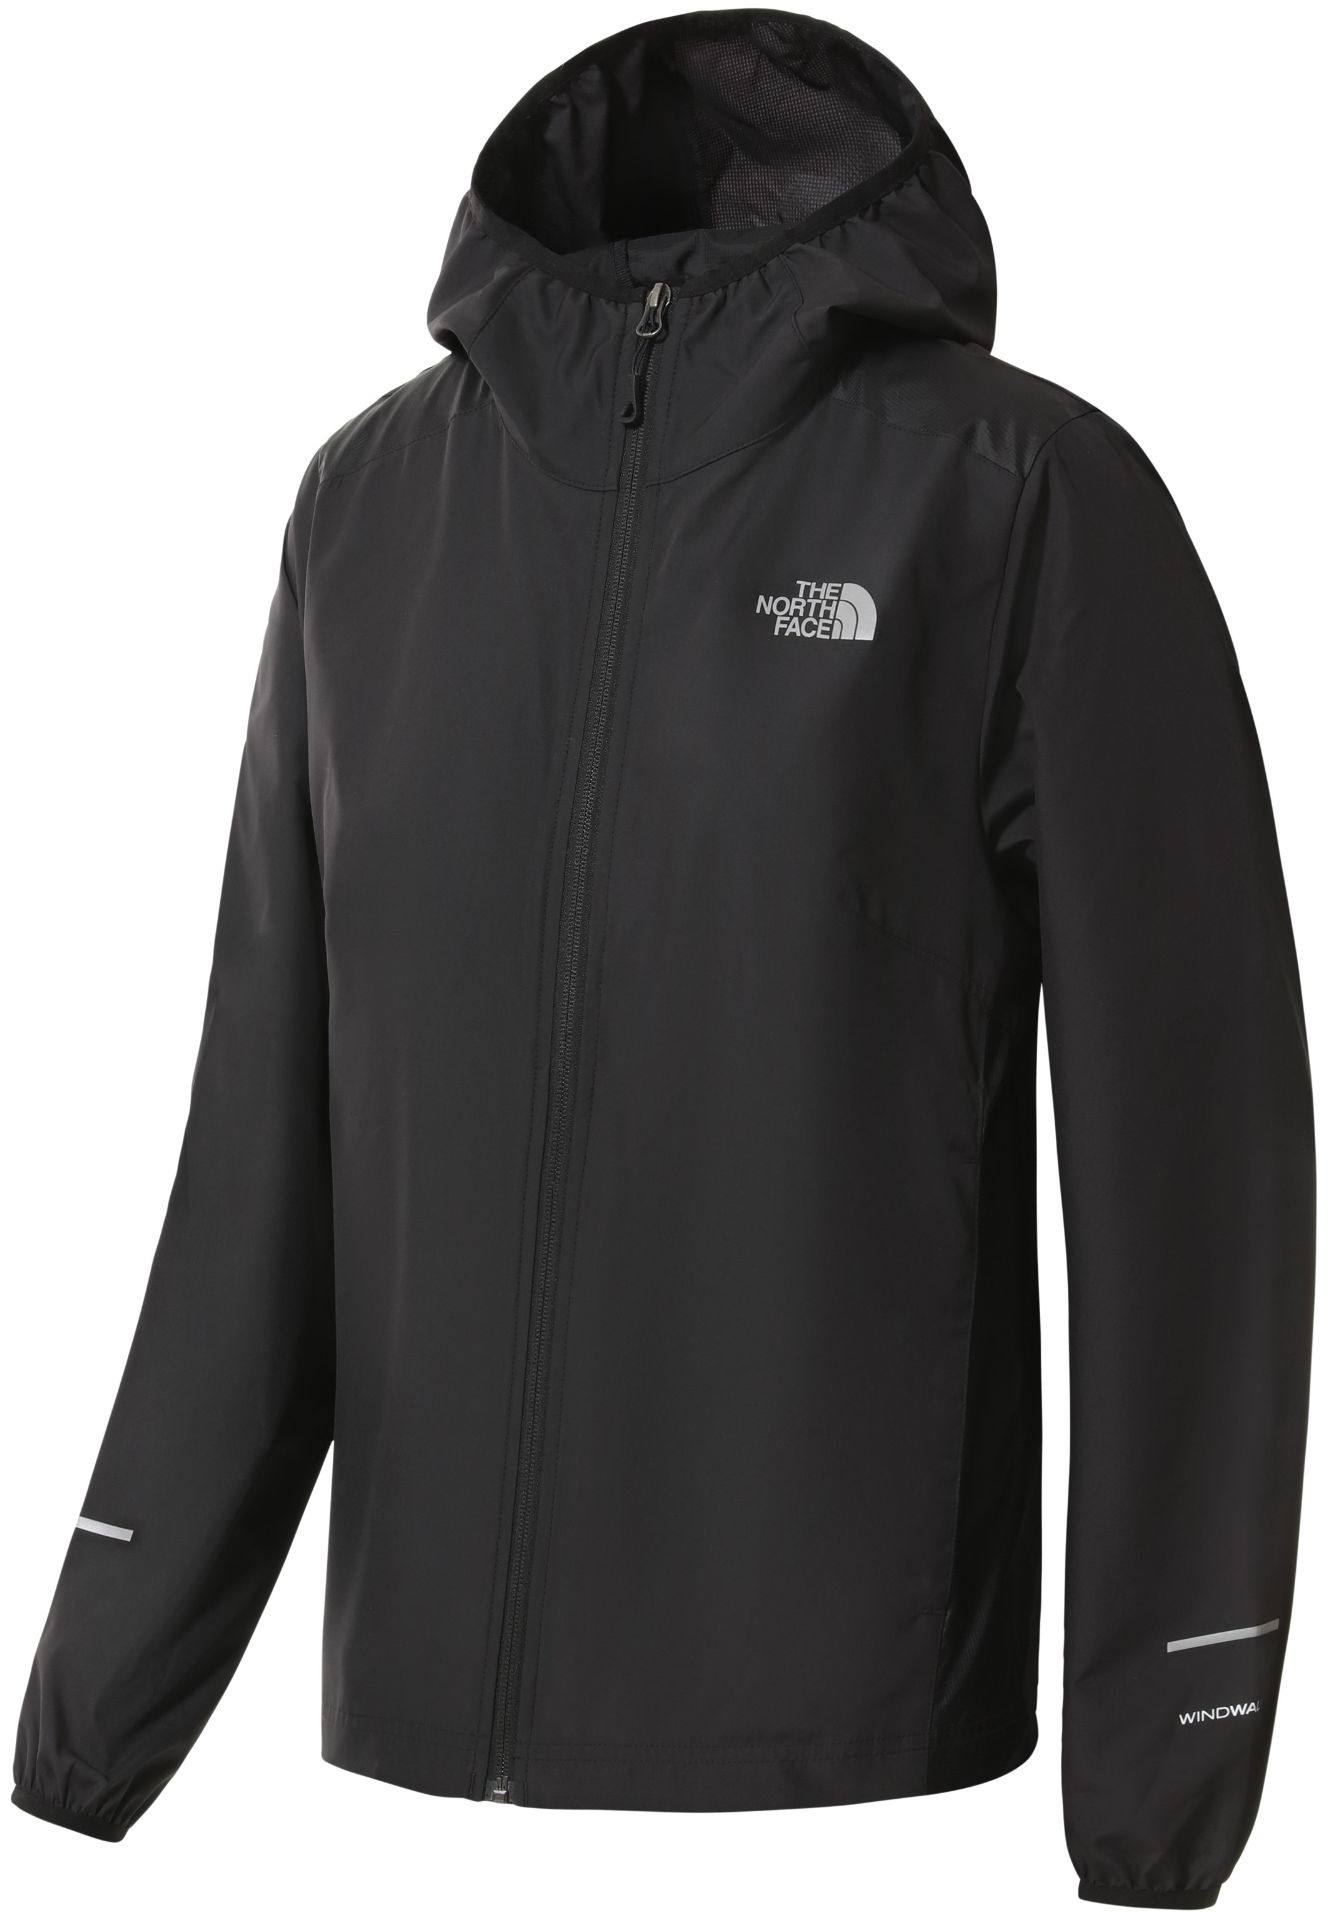 The North Face Women’s Running Wind Jacket Black M